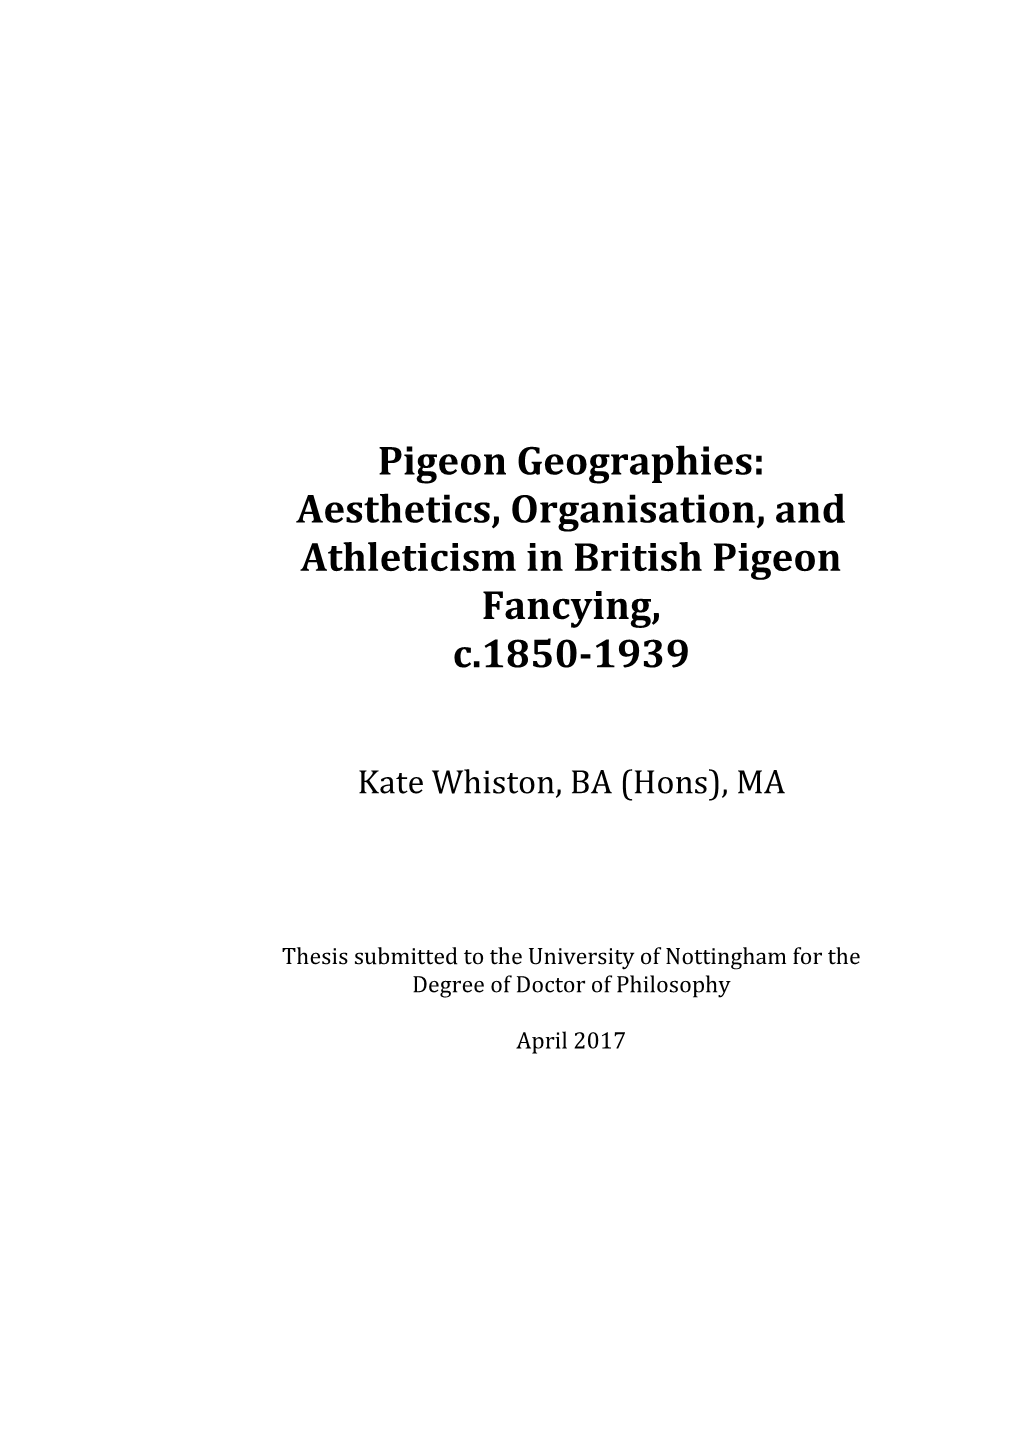 Pigeon Geographies: Aesthetics, Organisation, and Athleticism in British Pigeon Fancying, C.1850-1939